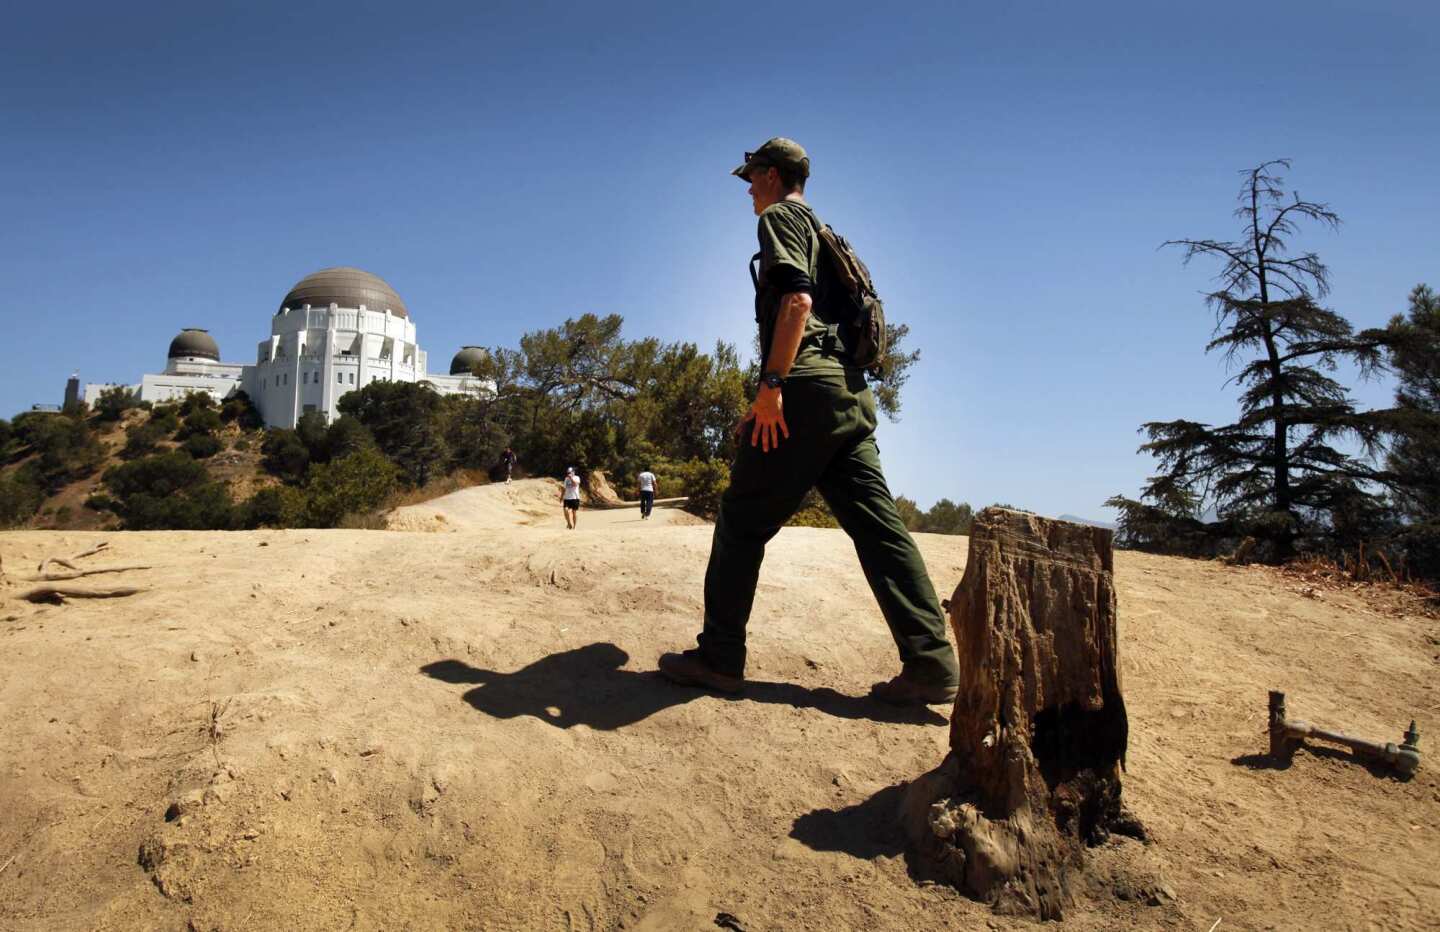 Jeff Sikich, wildlife biologist with the National Park Service, walks a trail in Griffith Park near the observatory to access remote cameras used to monitor possible activity by mountain lion P-22. Sikich and his team captured and radio-collared the lion near Griffith Park on March 28, but the GPS has stopped functioning.